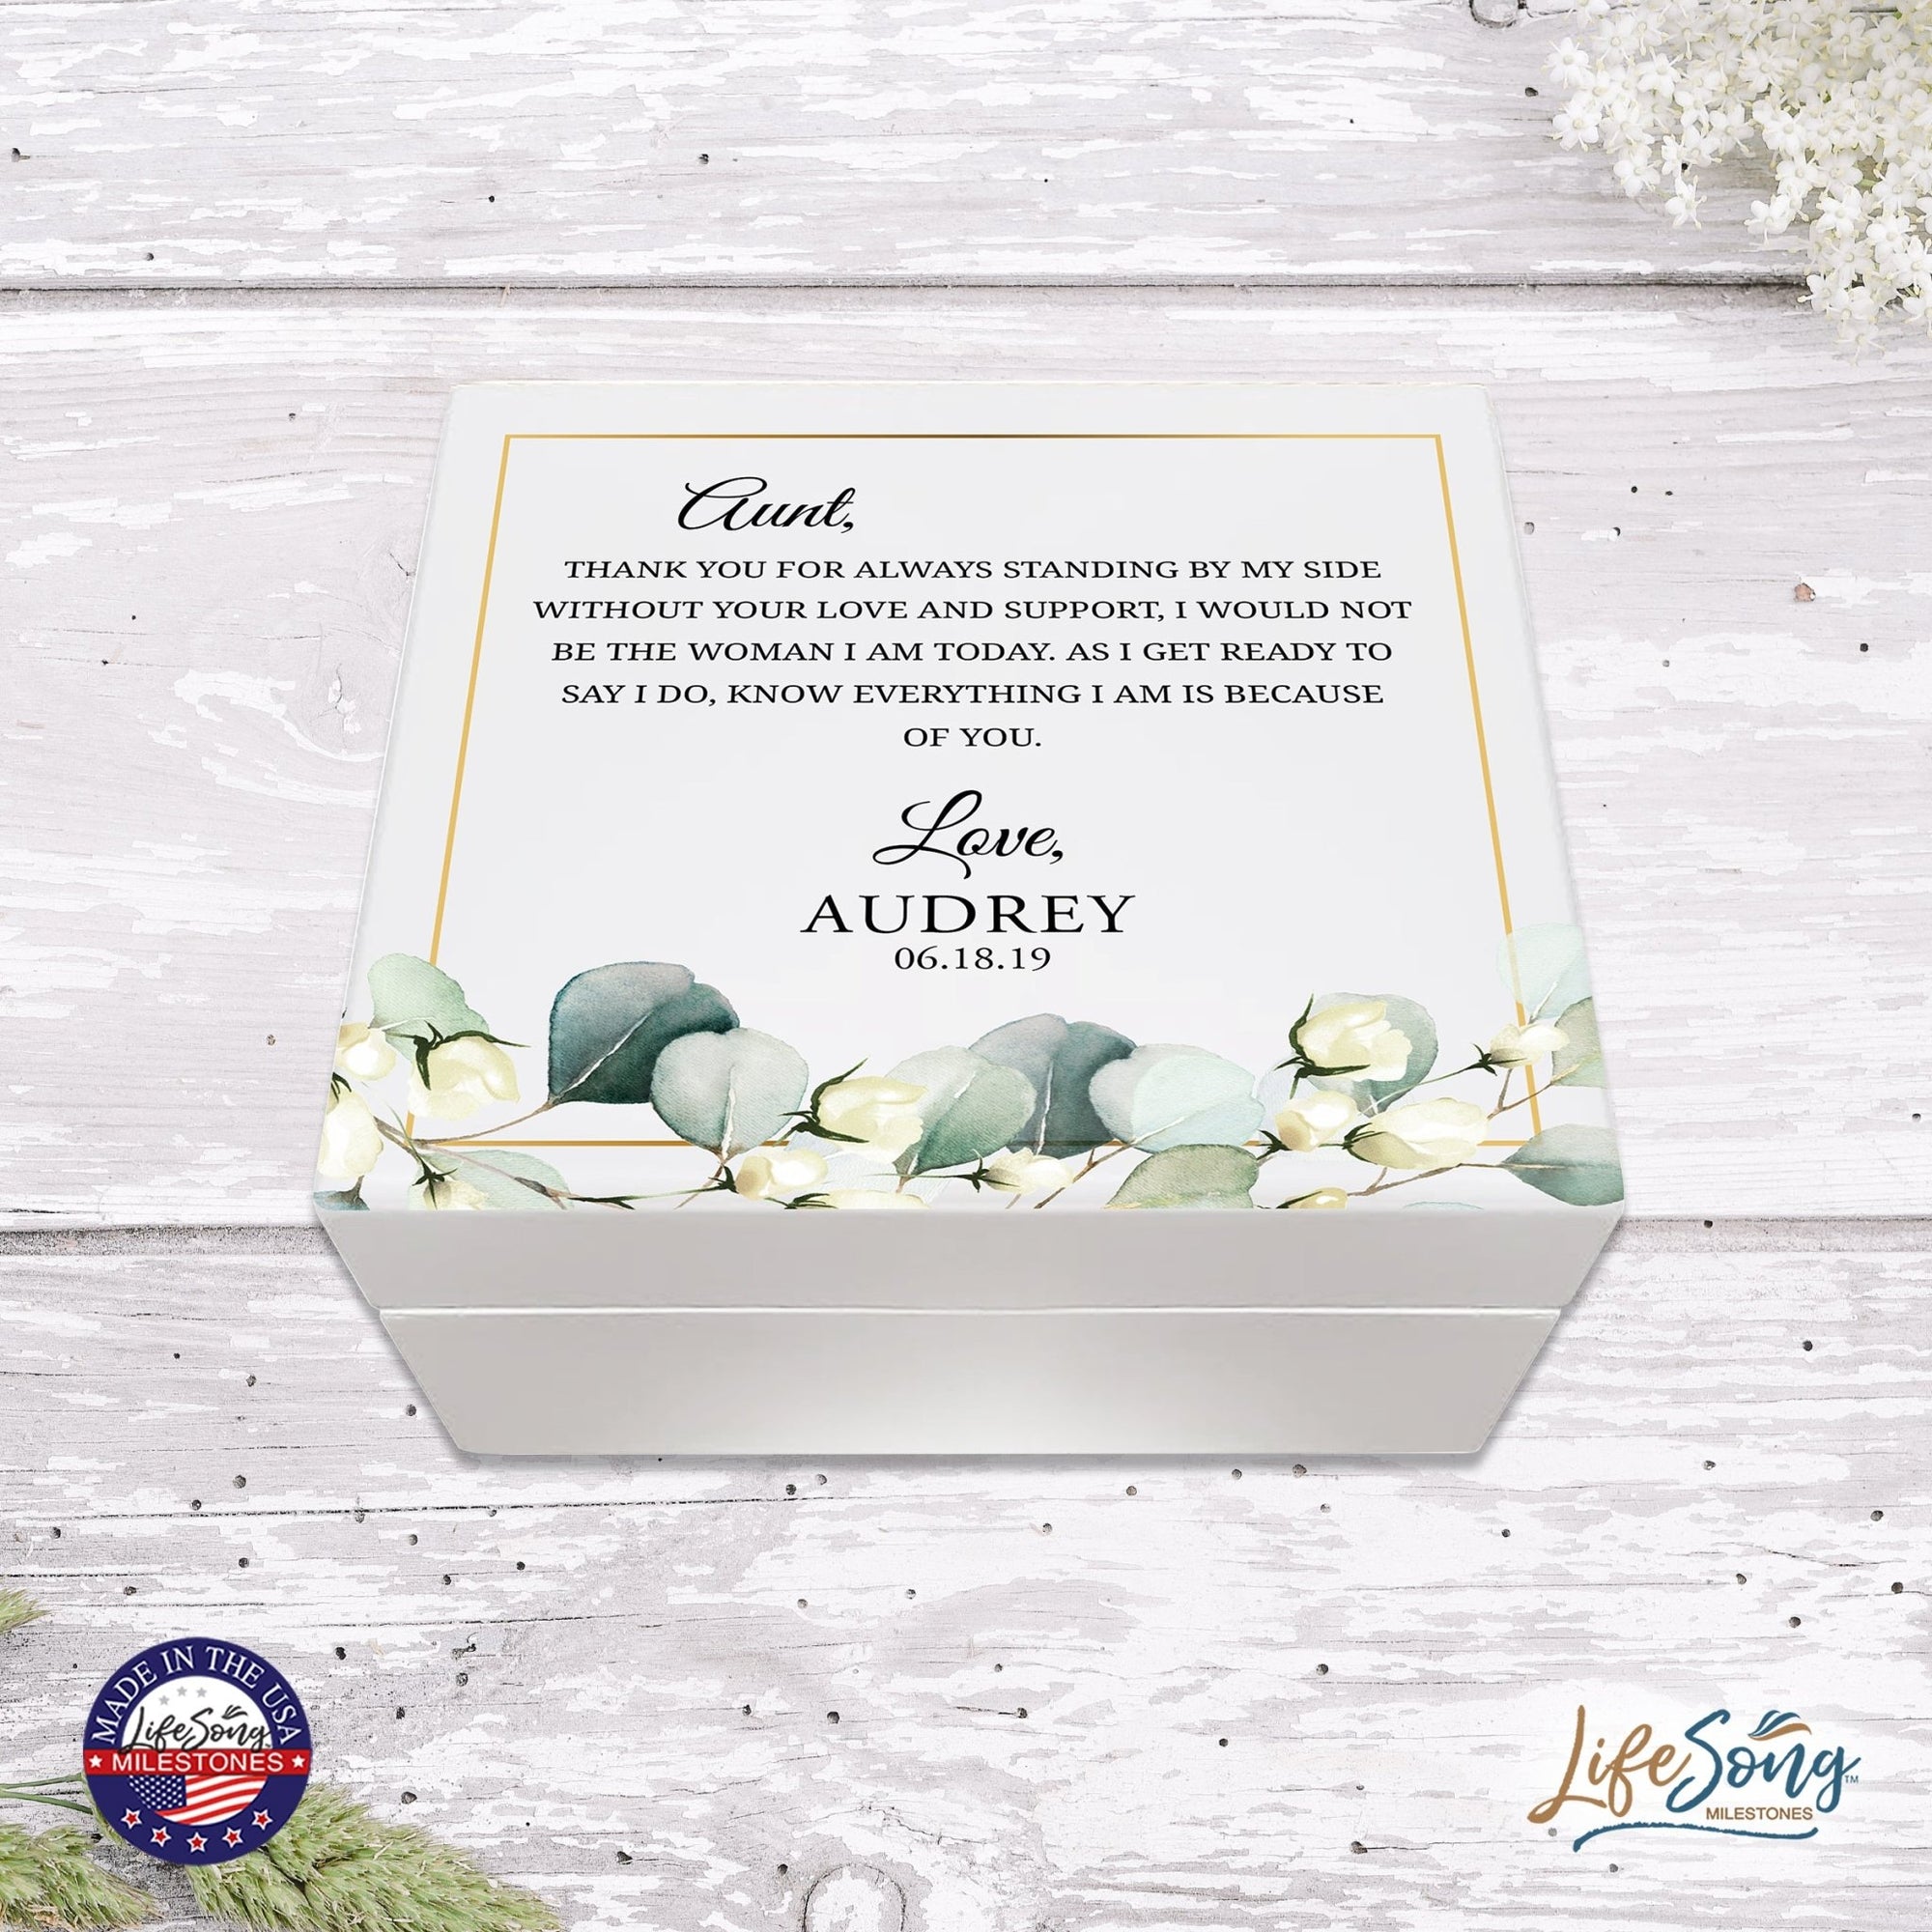 Personalized Memorable Aunt’s White Keepsake Box 6x5.5in with inspiring verse - Thank You - LifeSong Milestones